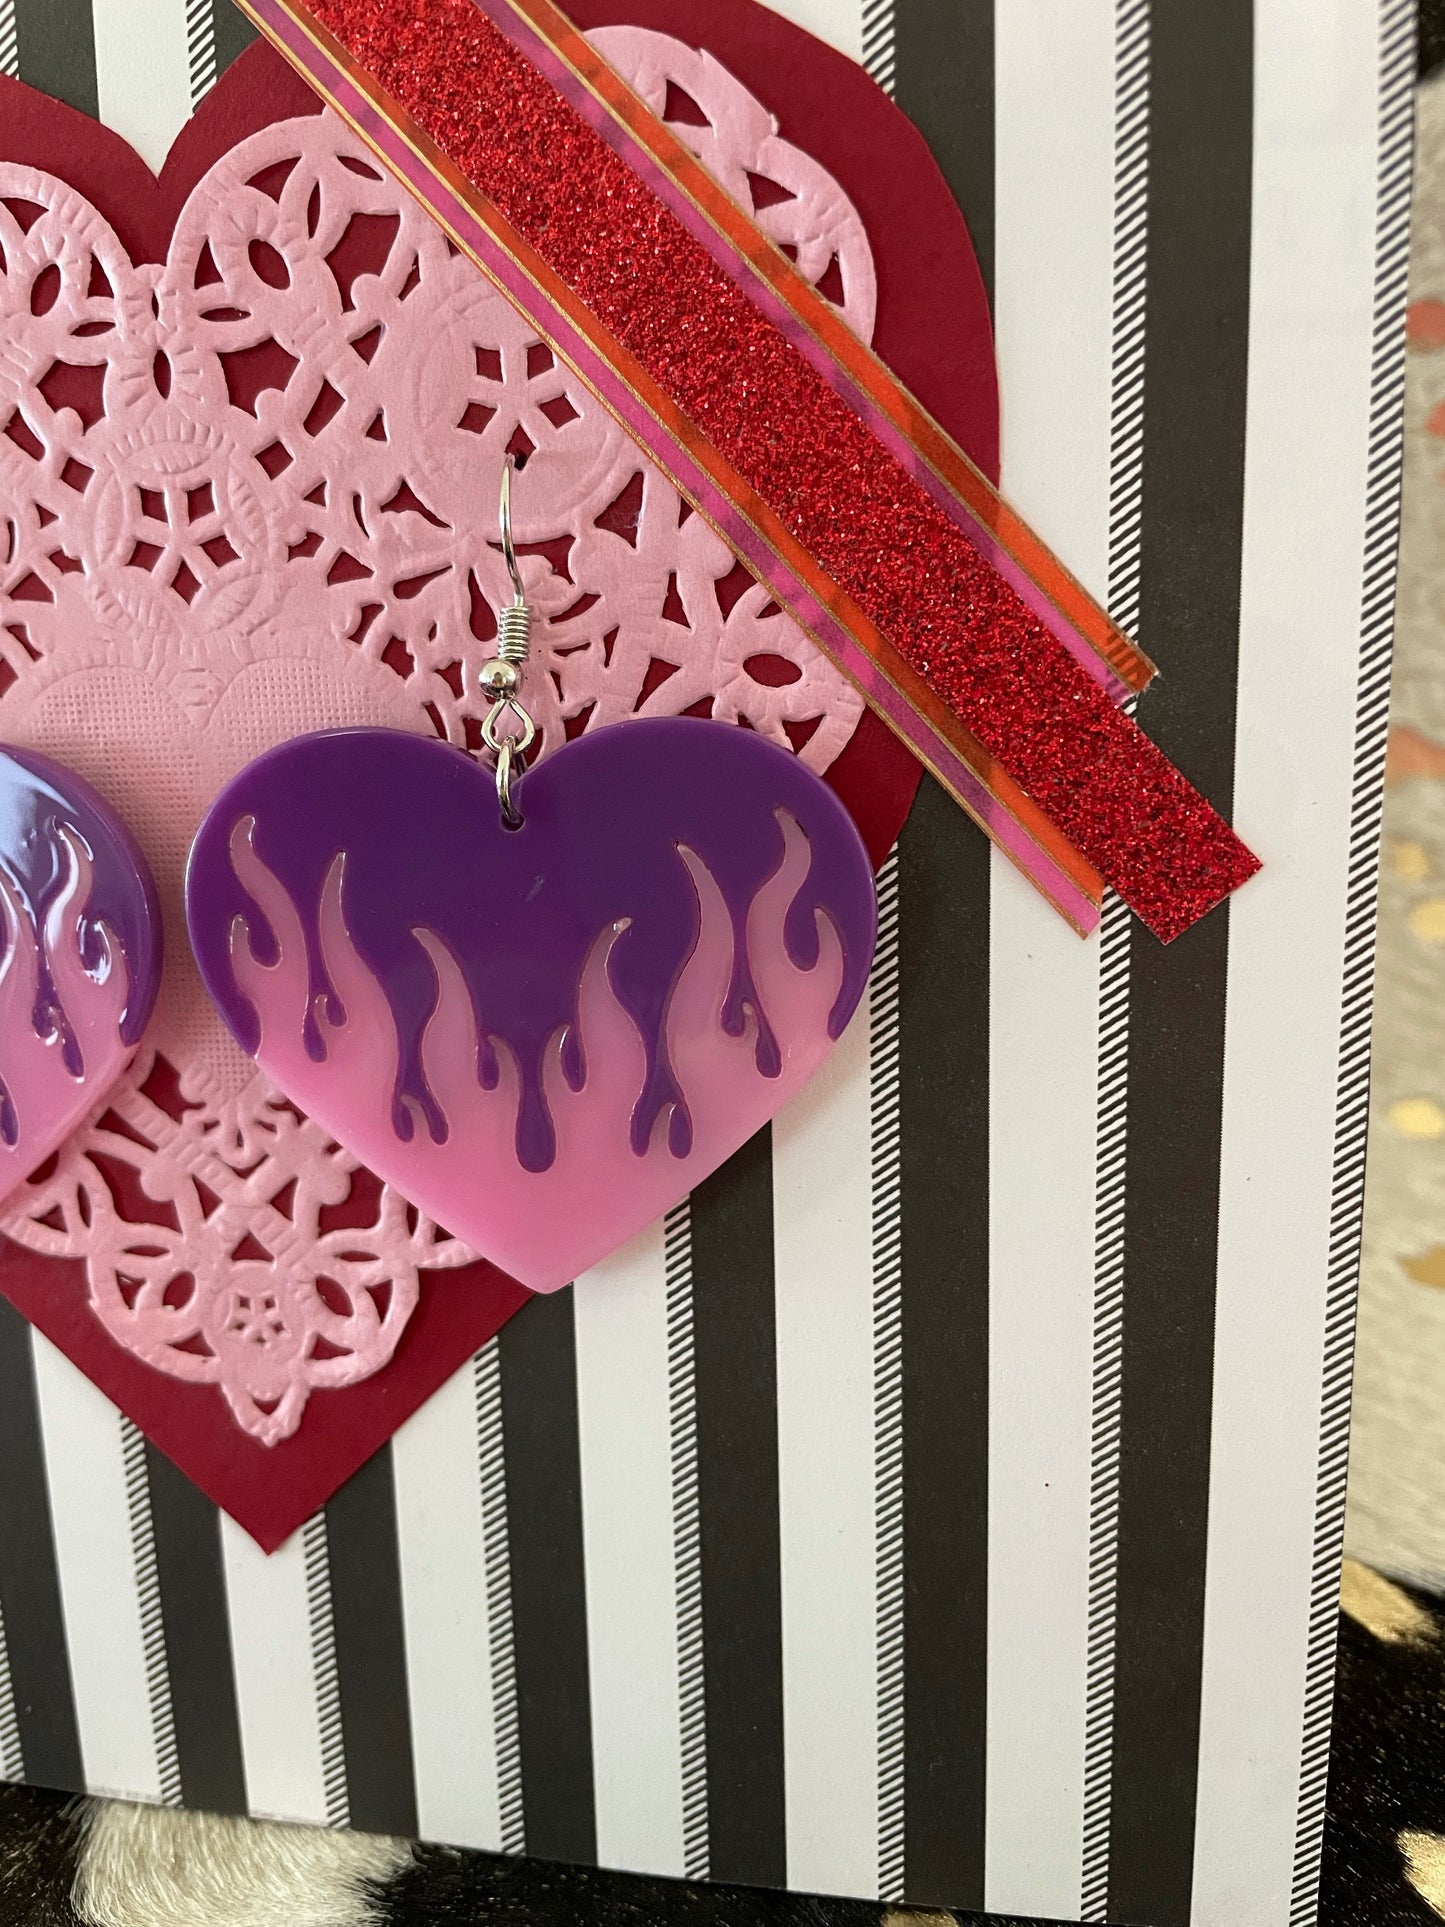 Big purple heart dangly earrings with pink flames.